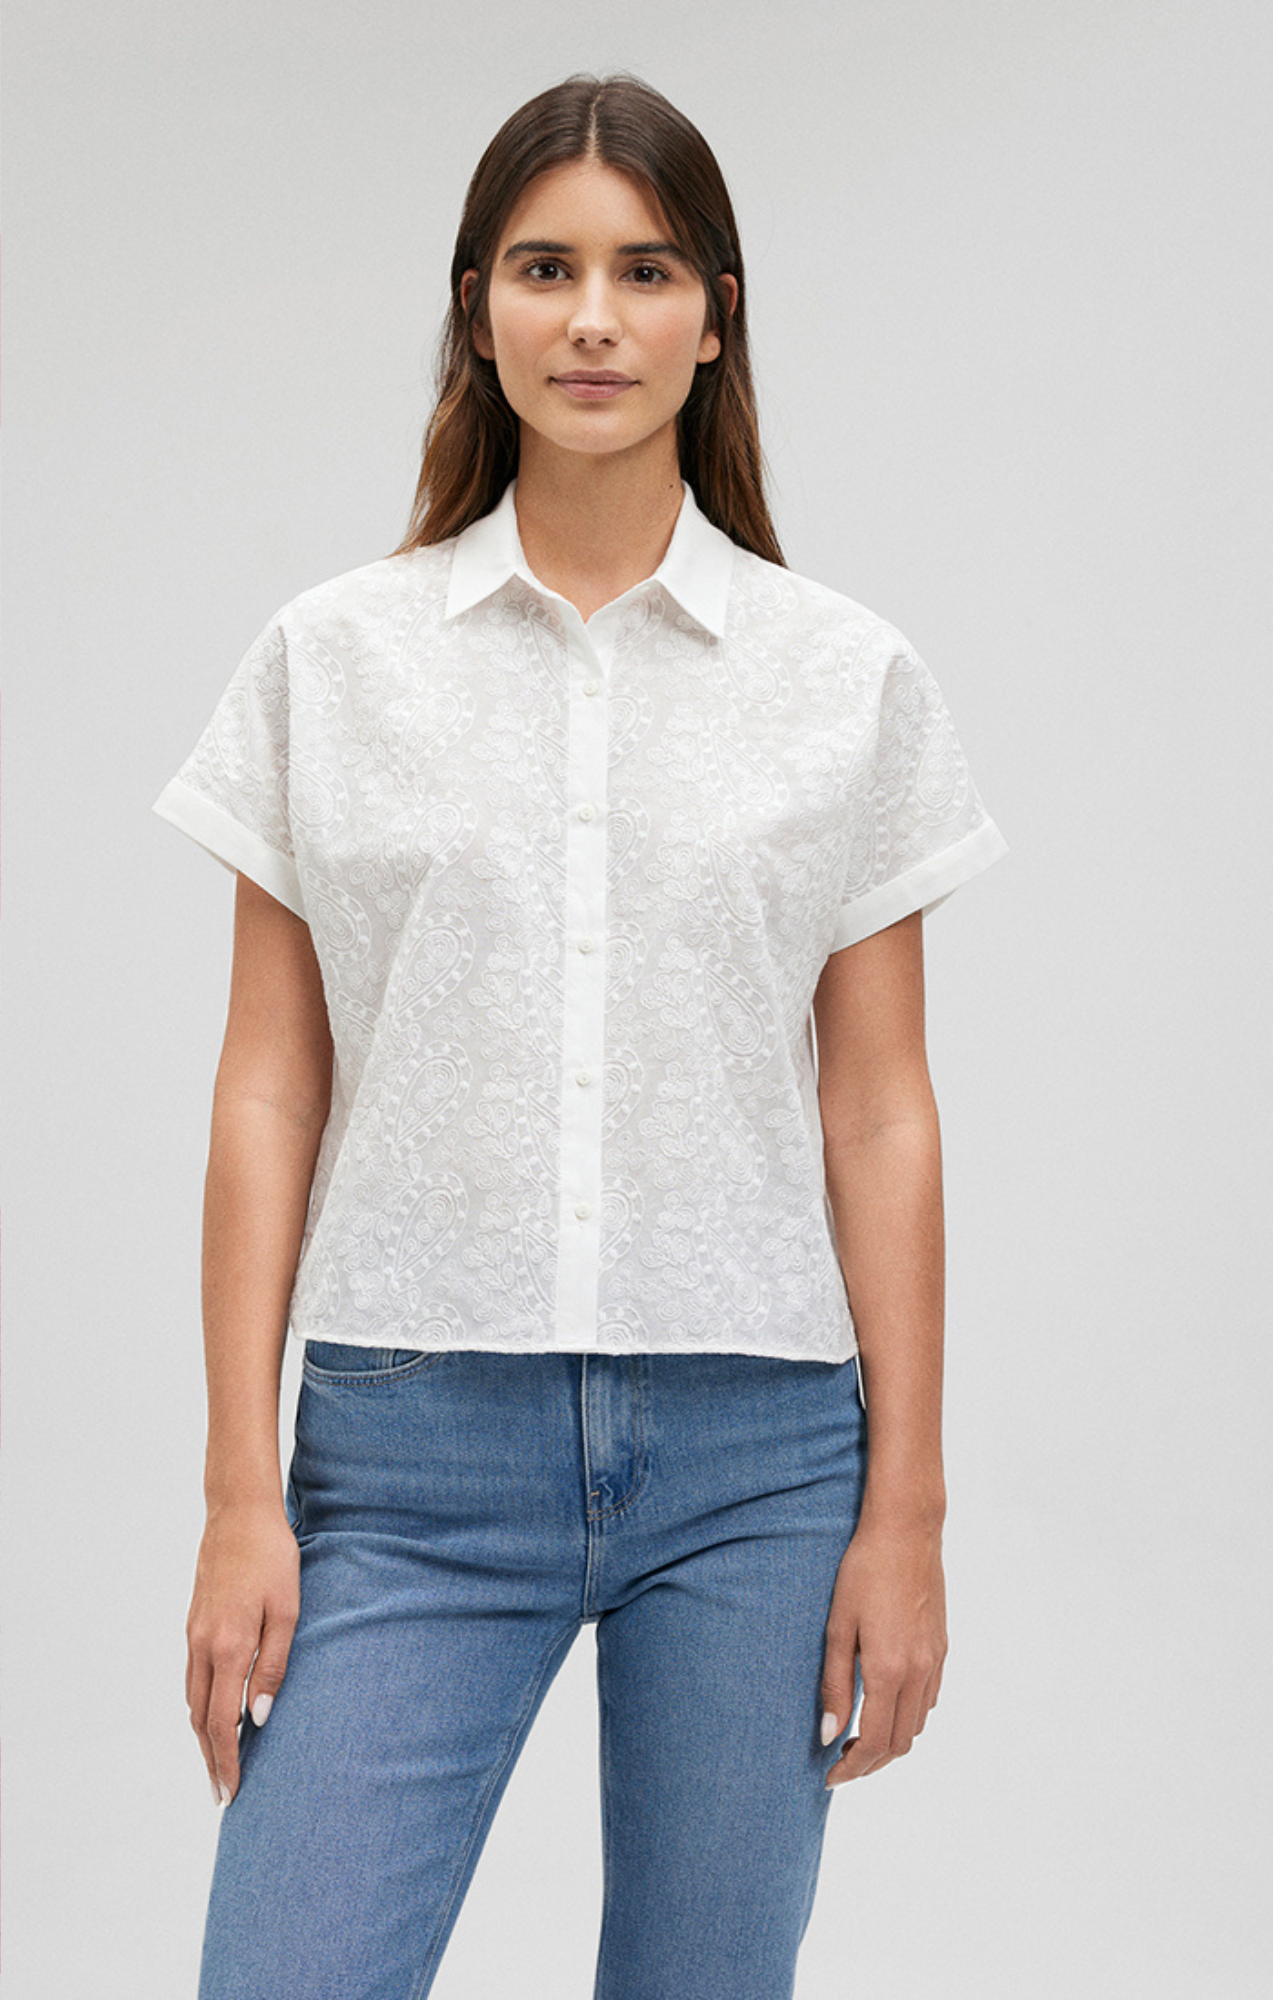 EMBROIDERED SHORT SLEEVE SHIRT IN ANTIQUE WHITE